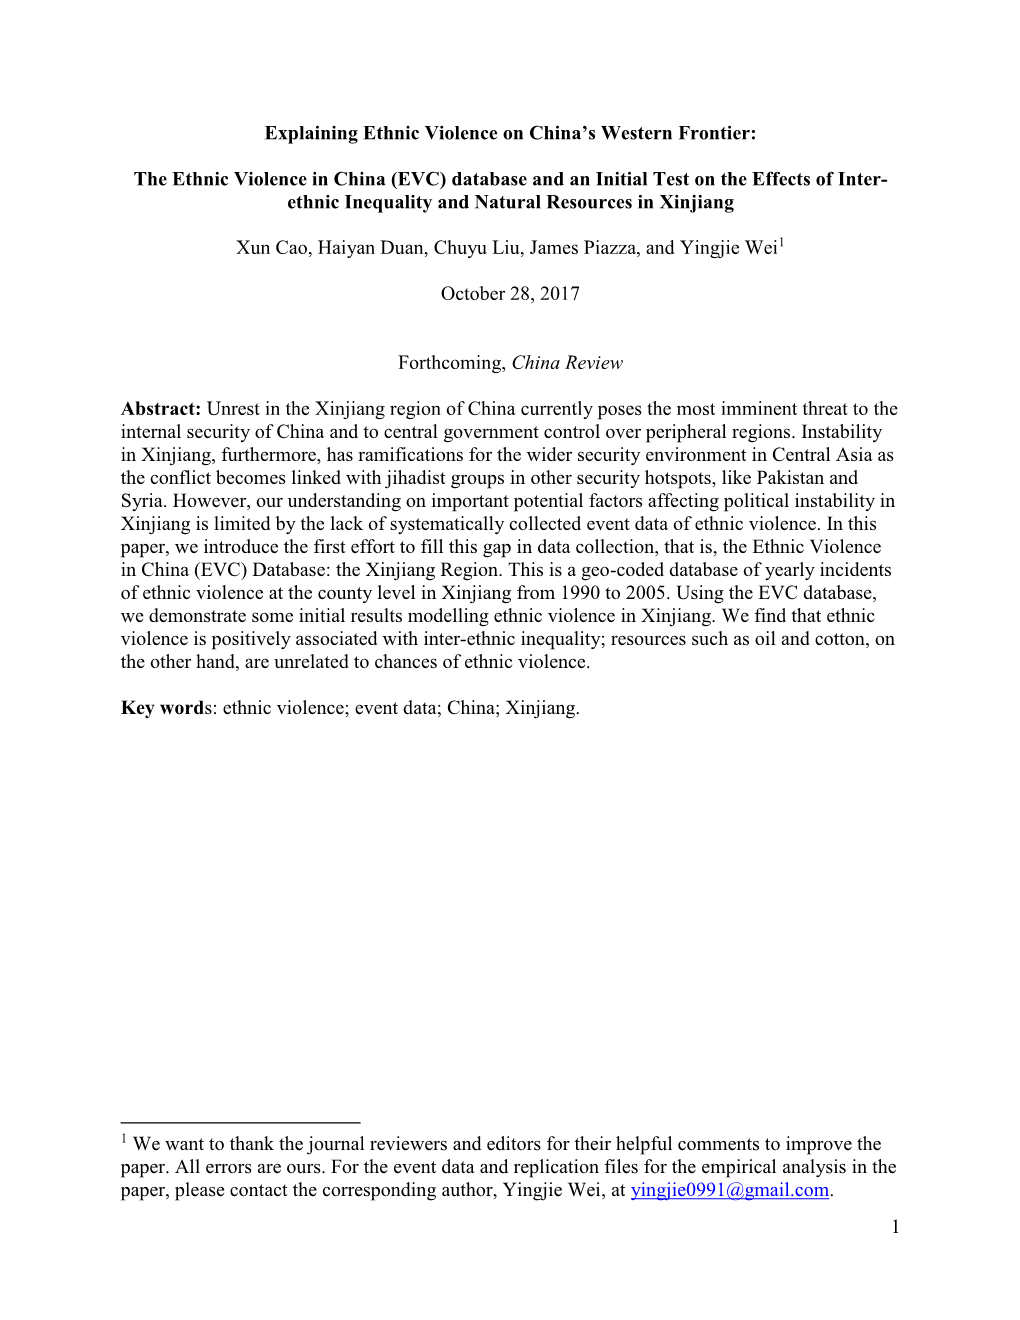 The Ethnic Violence in China (EVC) Database and an Initial Test on the Effects of Inter- Ethnic Inequality and Natural Resources in Xinjiang